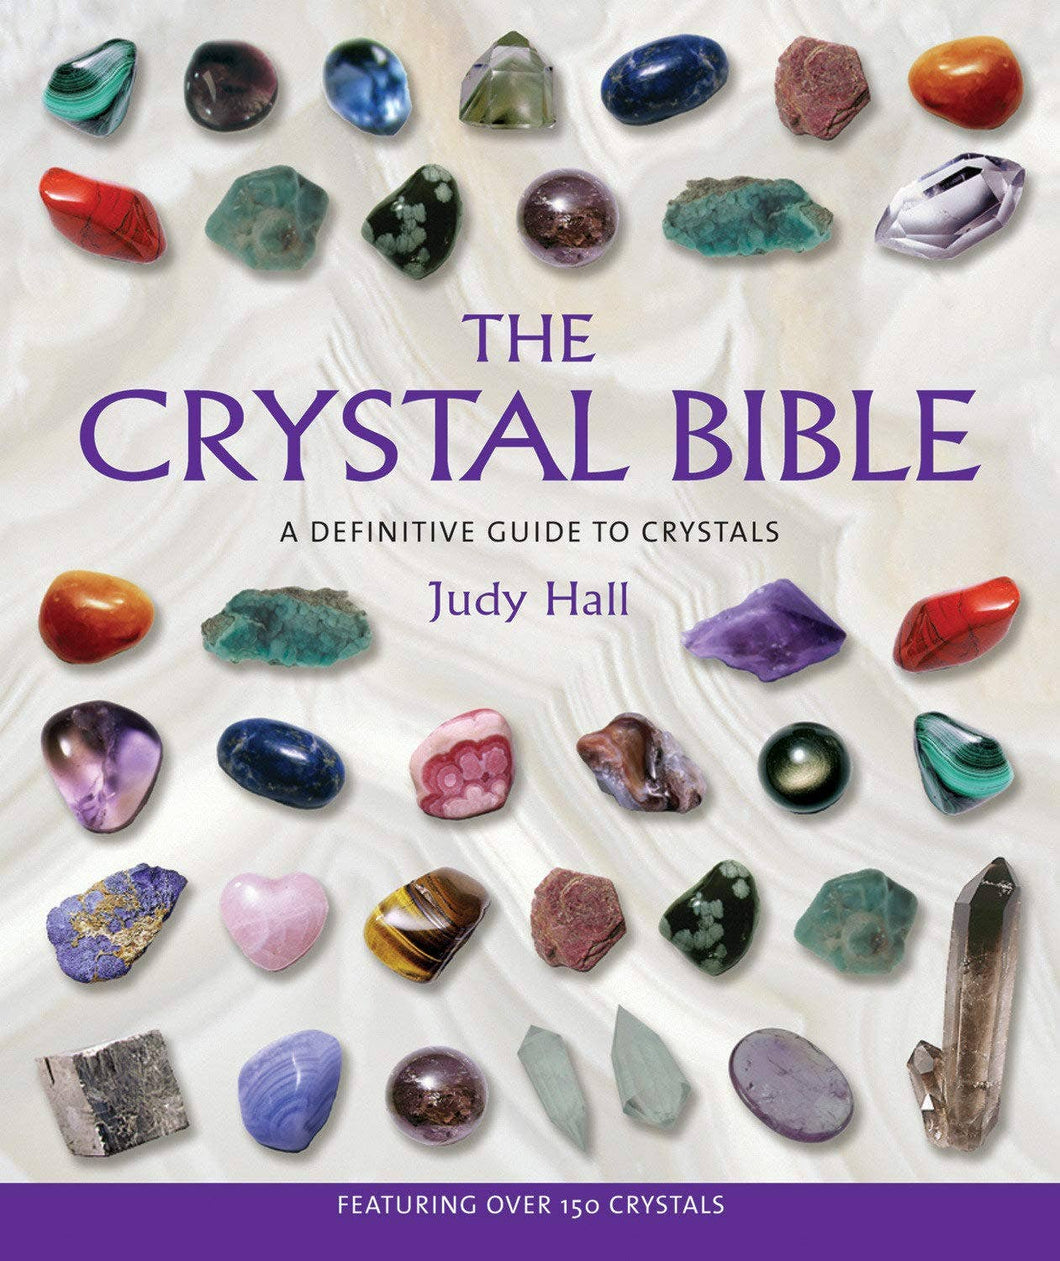 Microcosm Publishing & Distribution - Crystal Bible: A Definitive Guide to Crystals